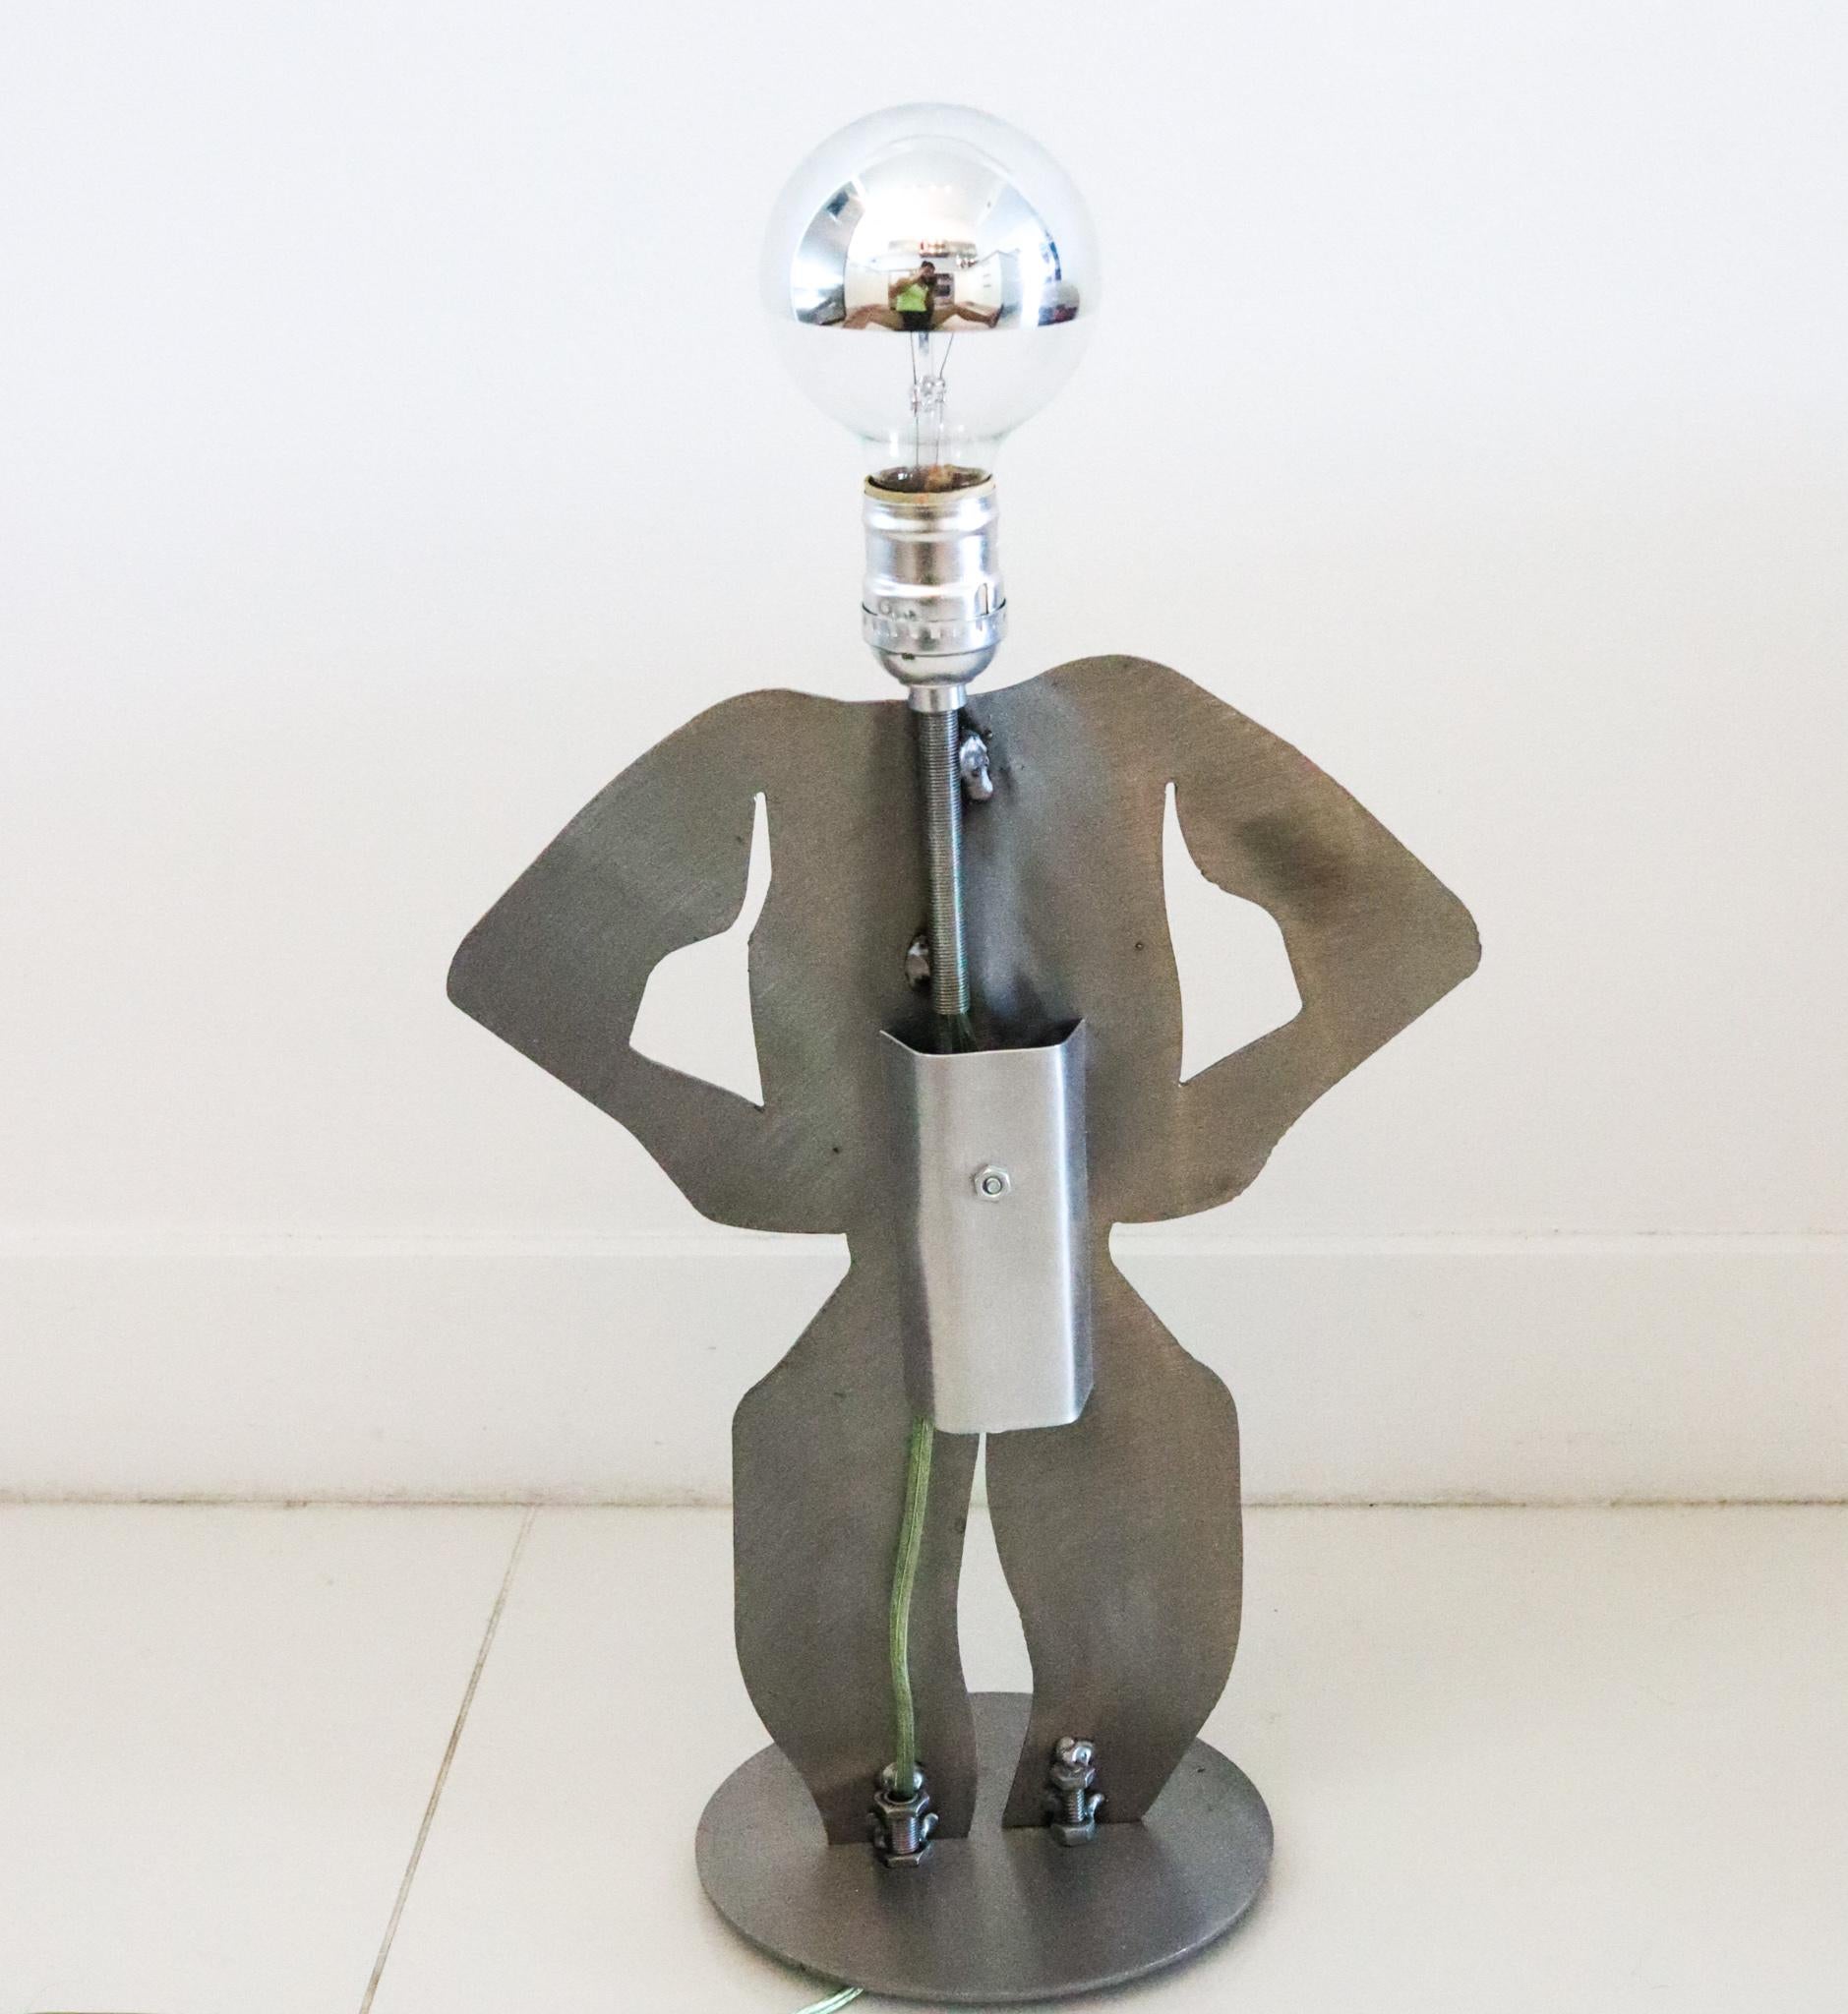 Brushed Postmodernist 1980 Memphis Pop-Art Lamp In Stainless Steel In The Shape of Man For Sale